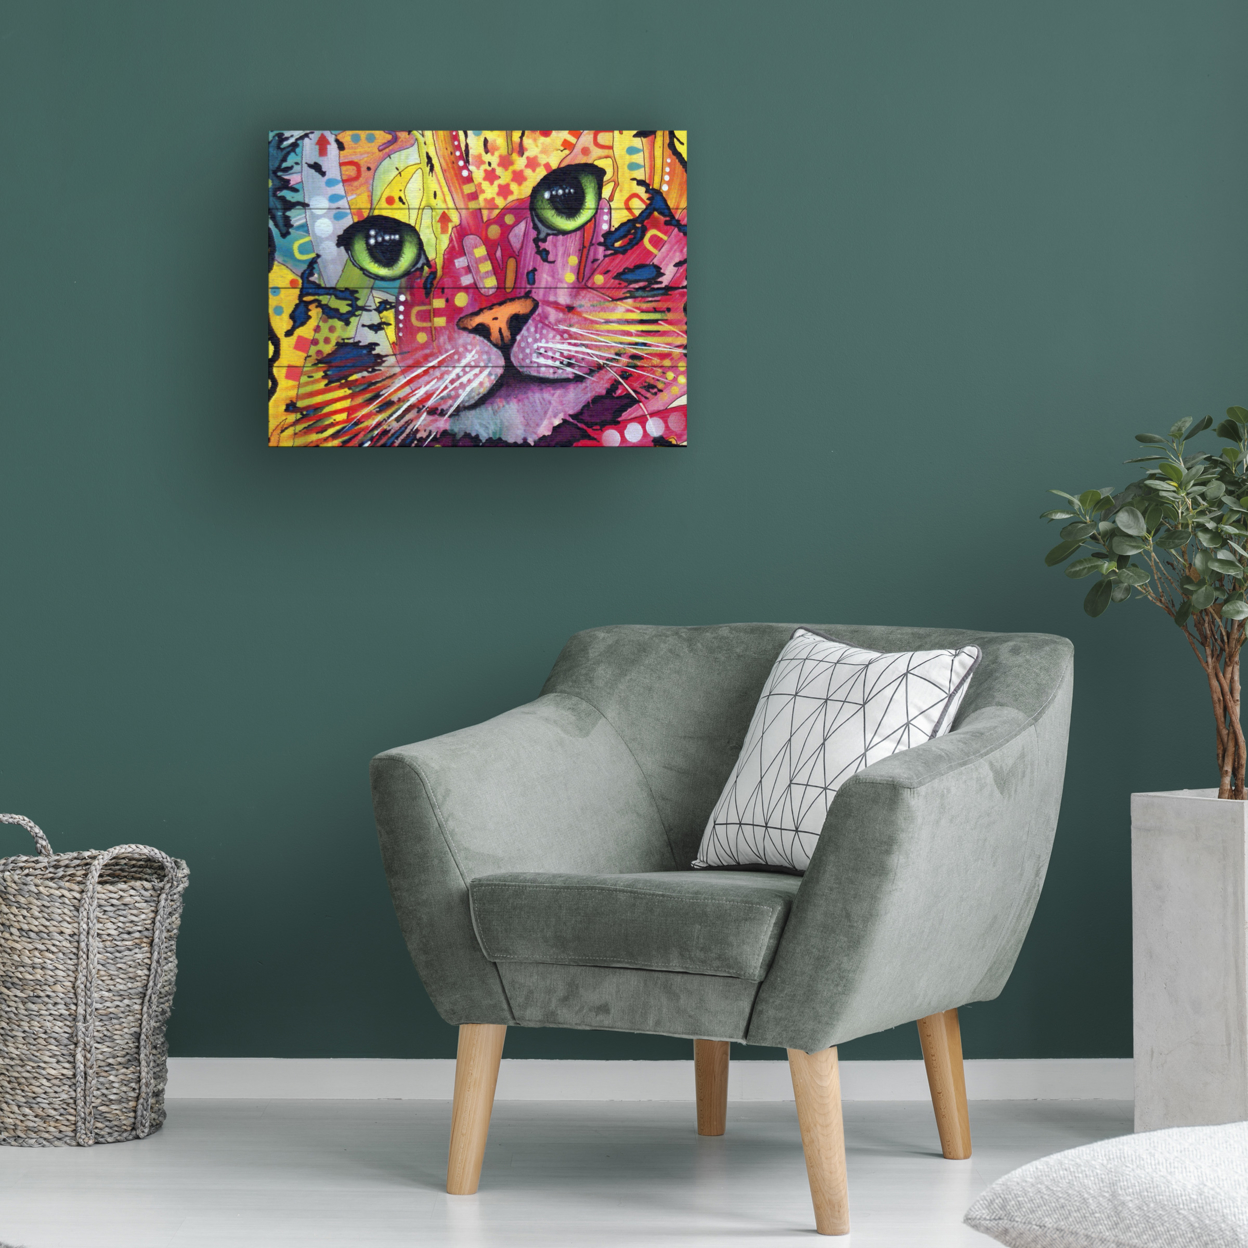 Wall Art 12 X 16 Inches Titled Tilt Cat Ready To Hang Printed On Wooden Planks